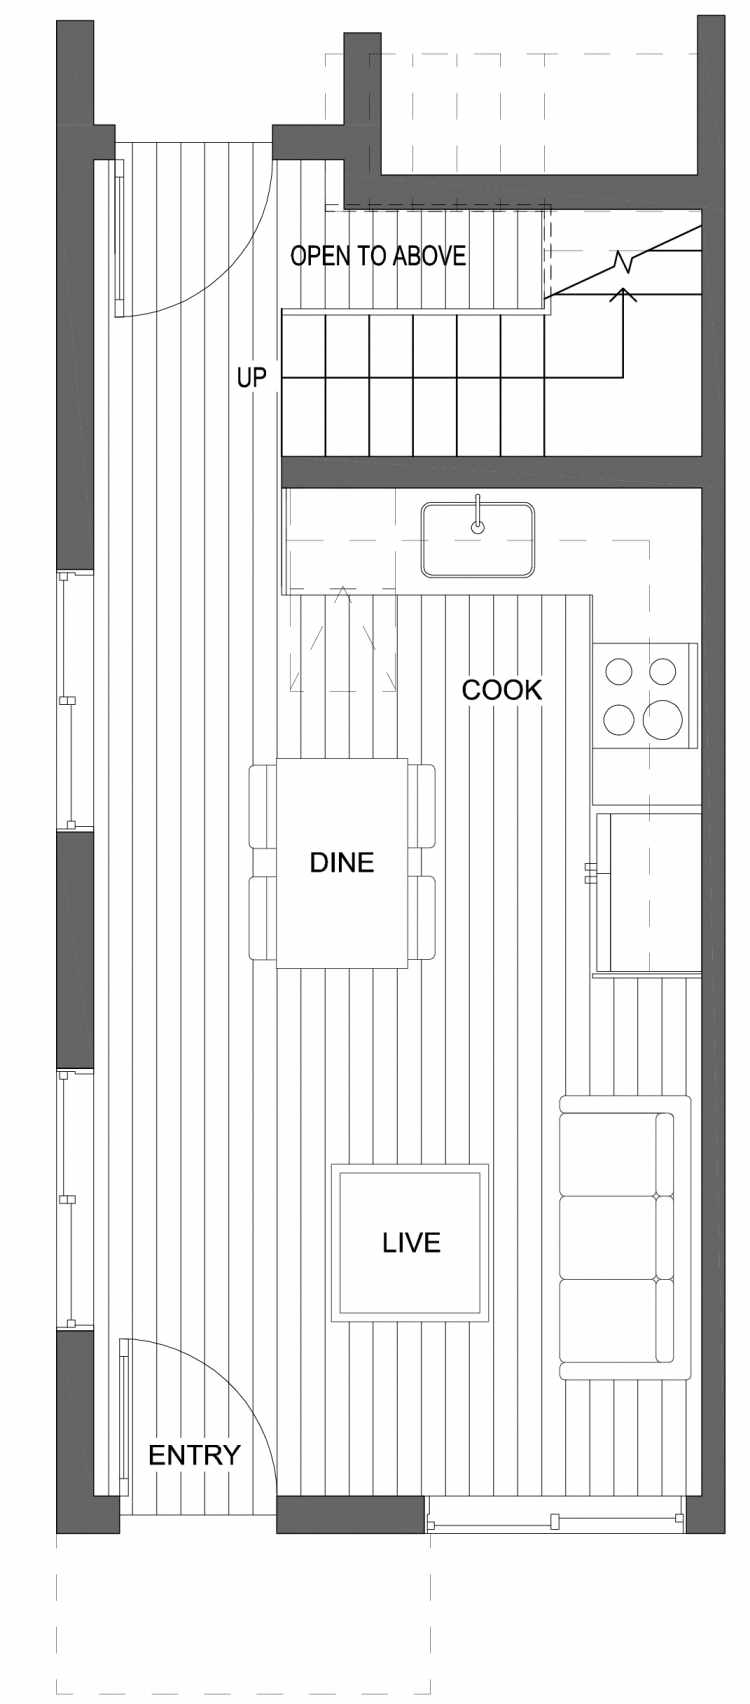 First Floor Plan of 10429A Alderbrook Pl NW, One of the Jasmine Townhomes in the Greenwood Neighborhood of Seattle